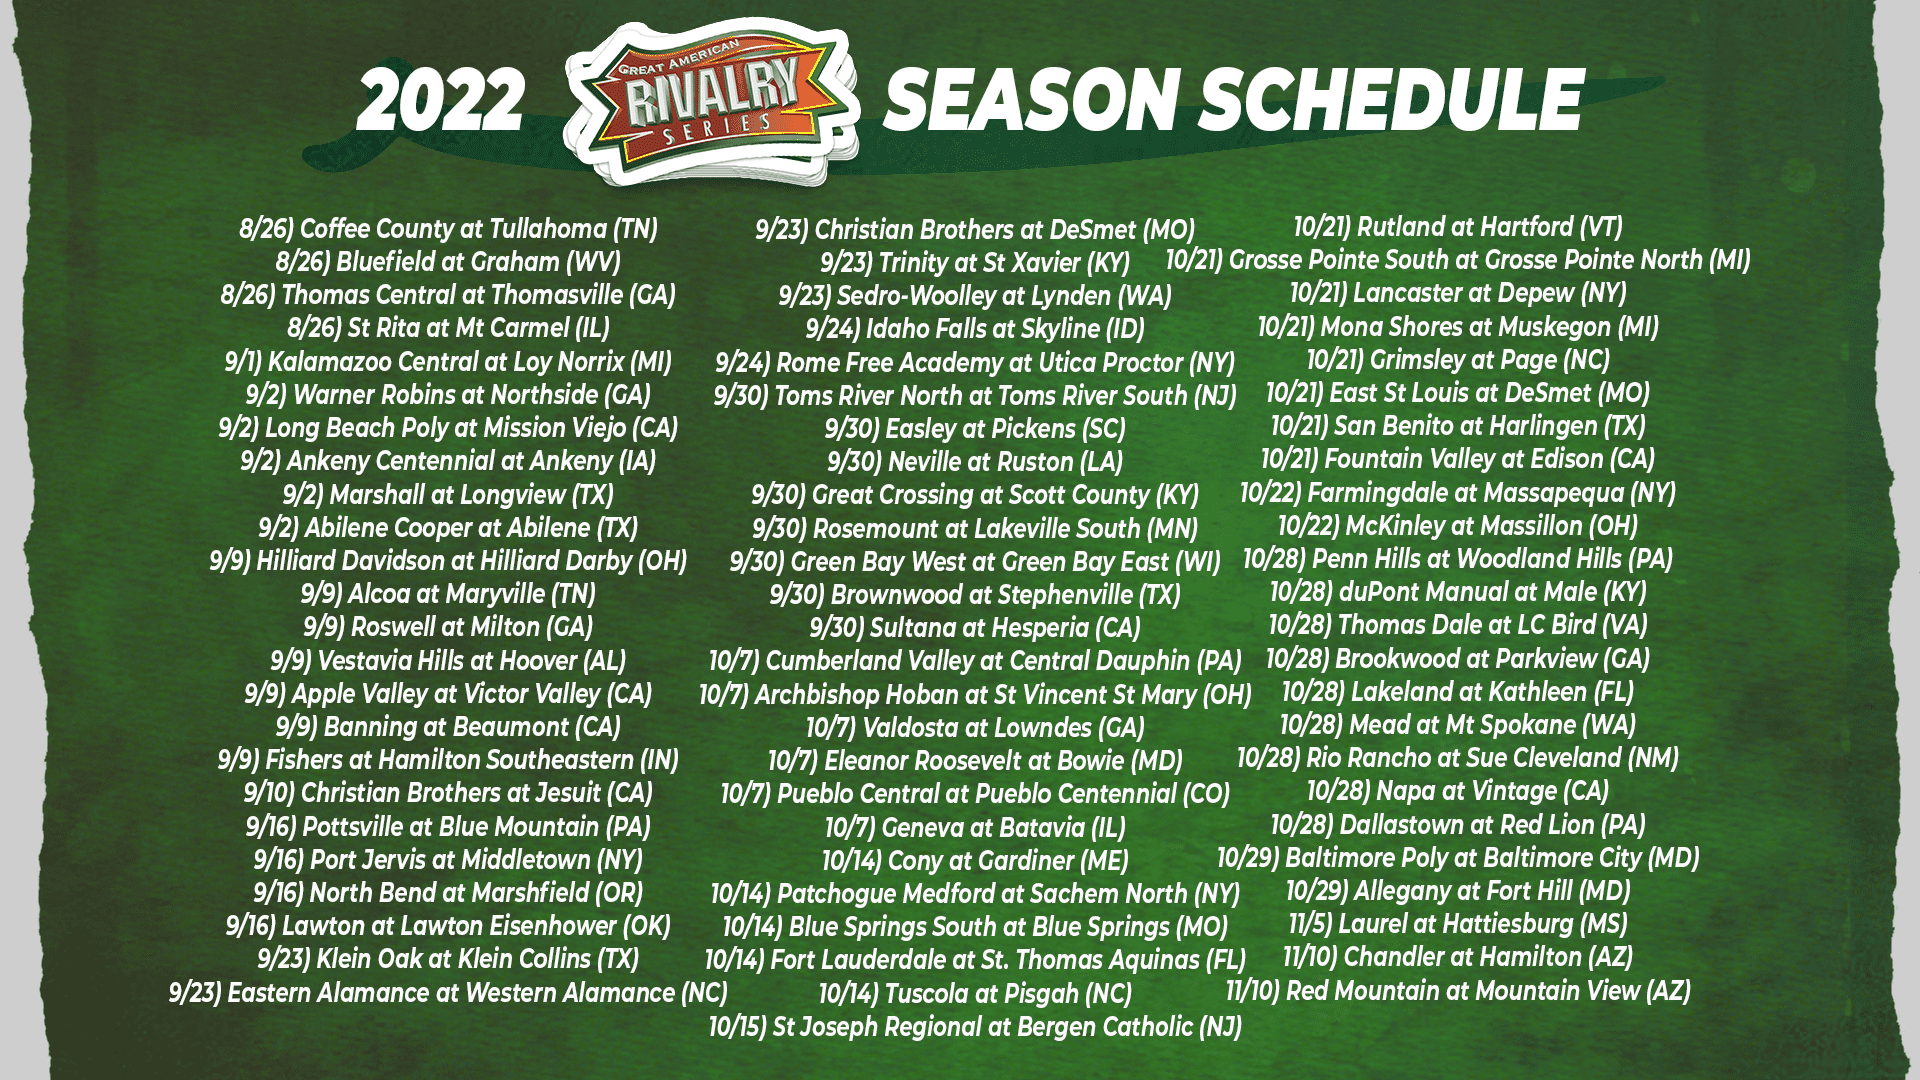 Great schedule wallpaper from